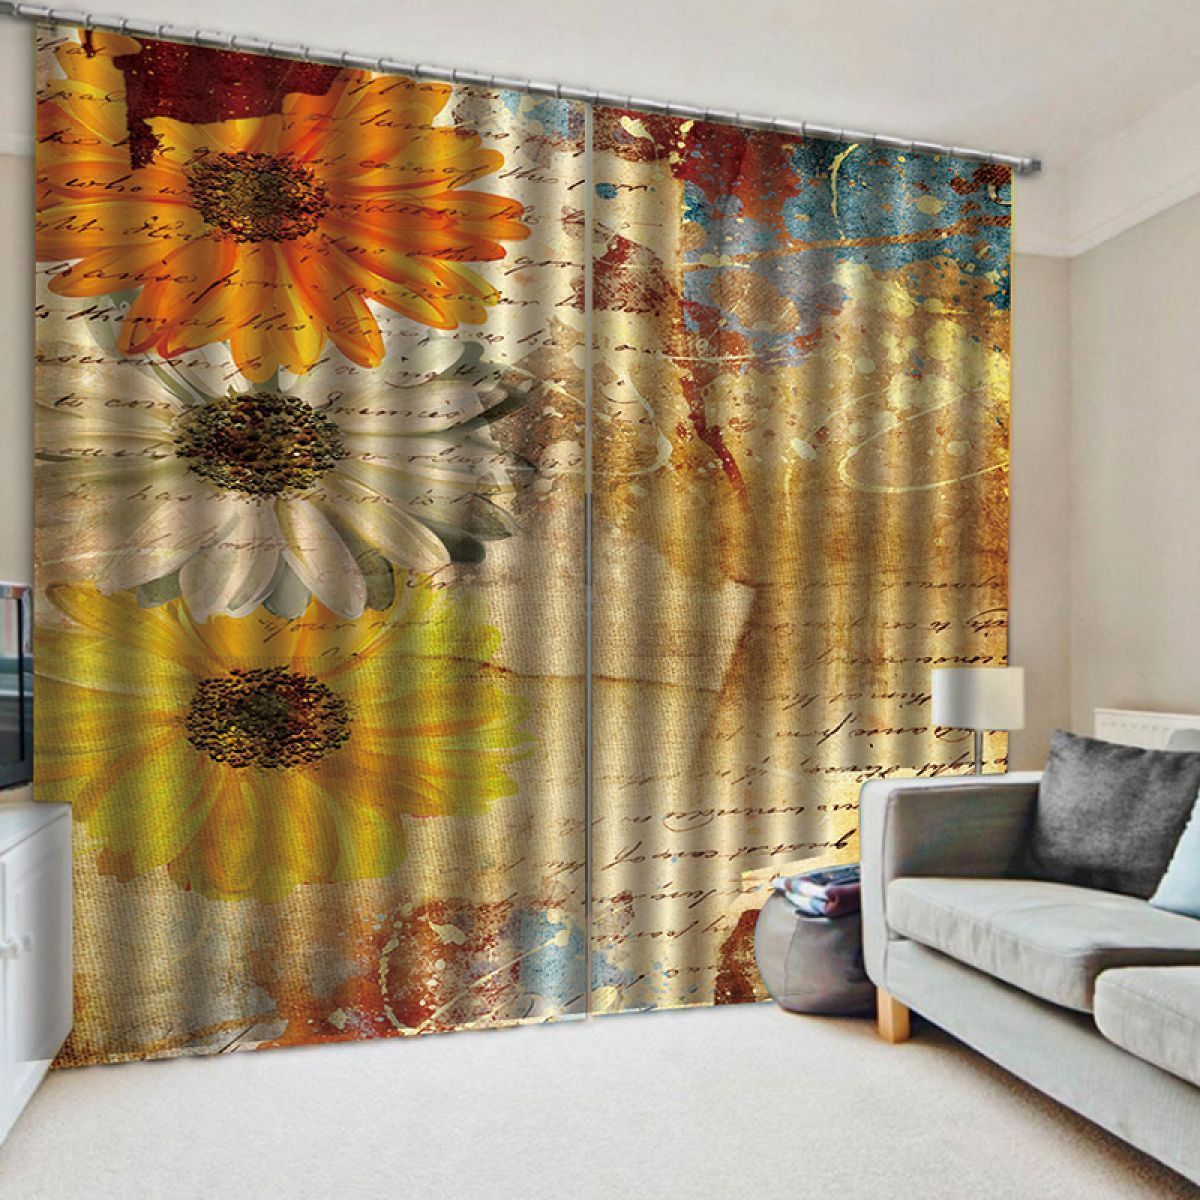 3d Sunflower Collage Printed Window Curtain Home Decor